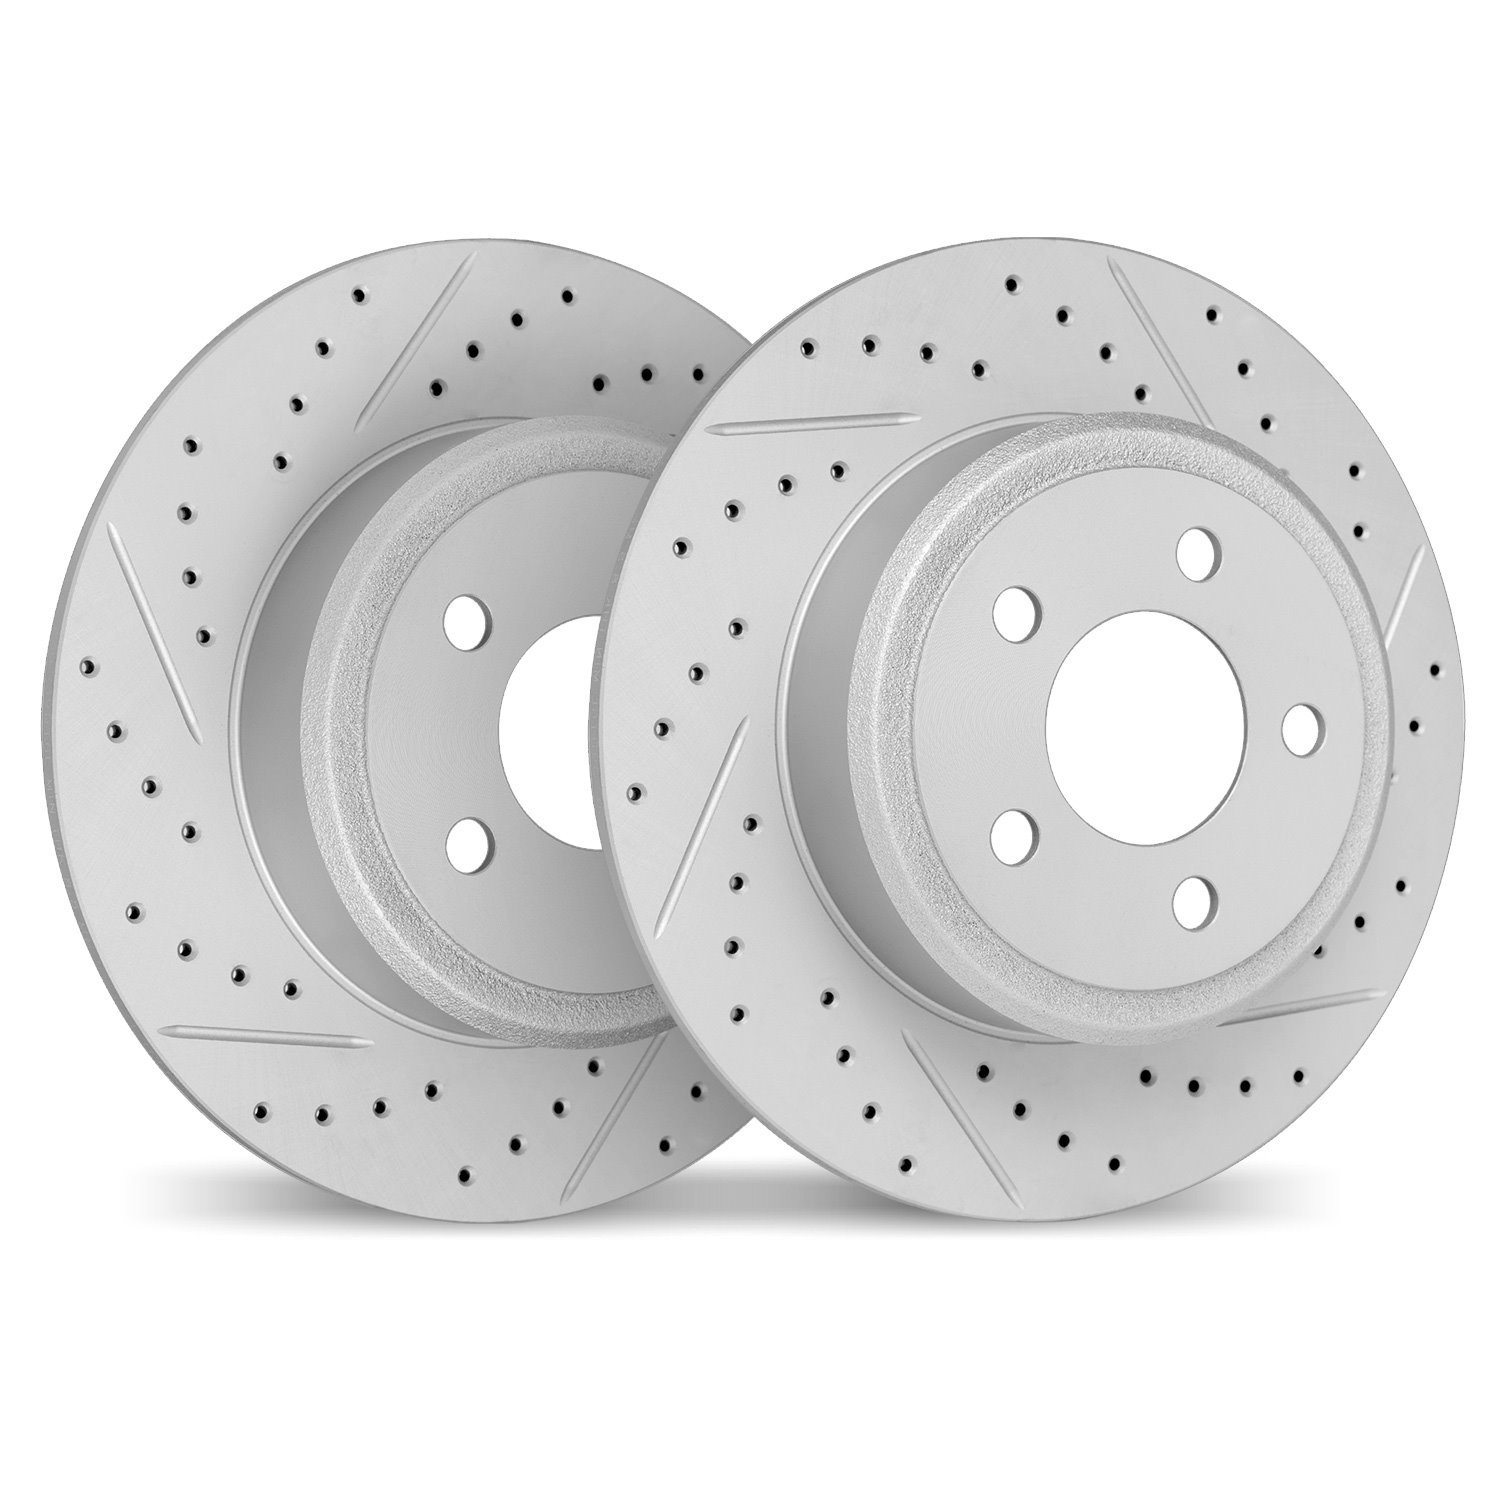 2002-52011 Geoperformance Drilled/Slotted Brake Rotors, 2005-2005 GM, Position: Rear